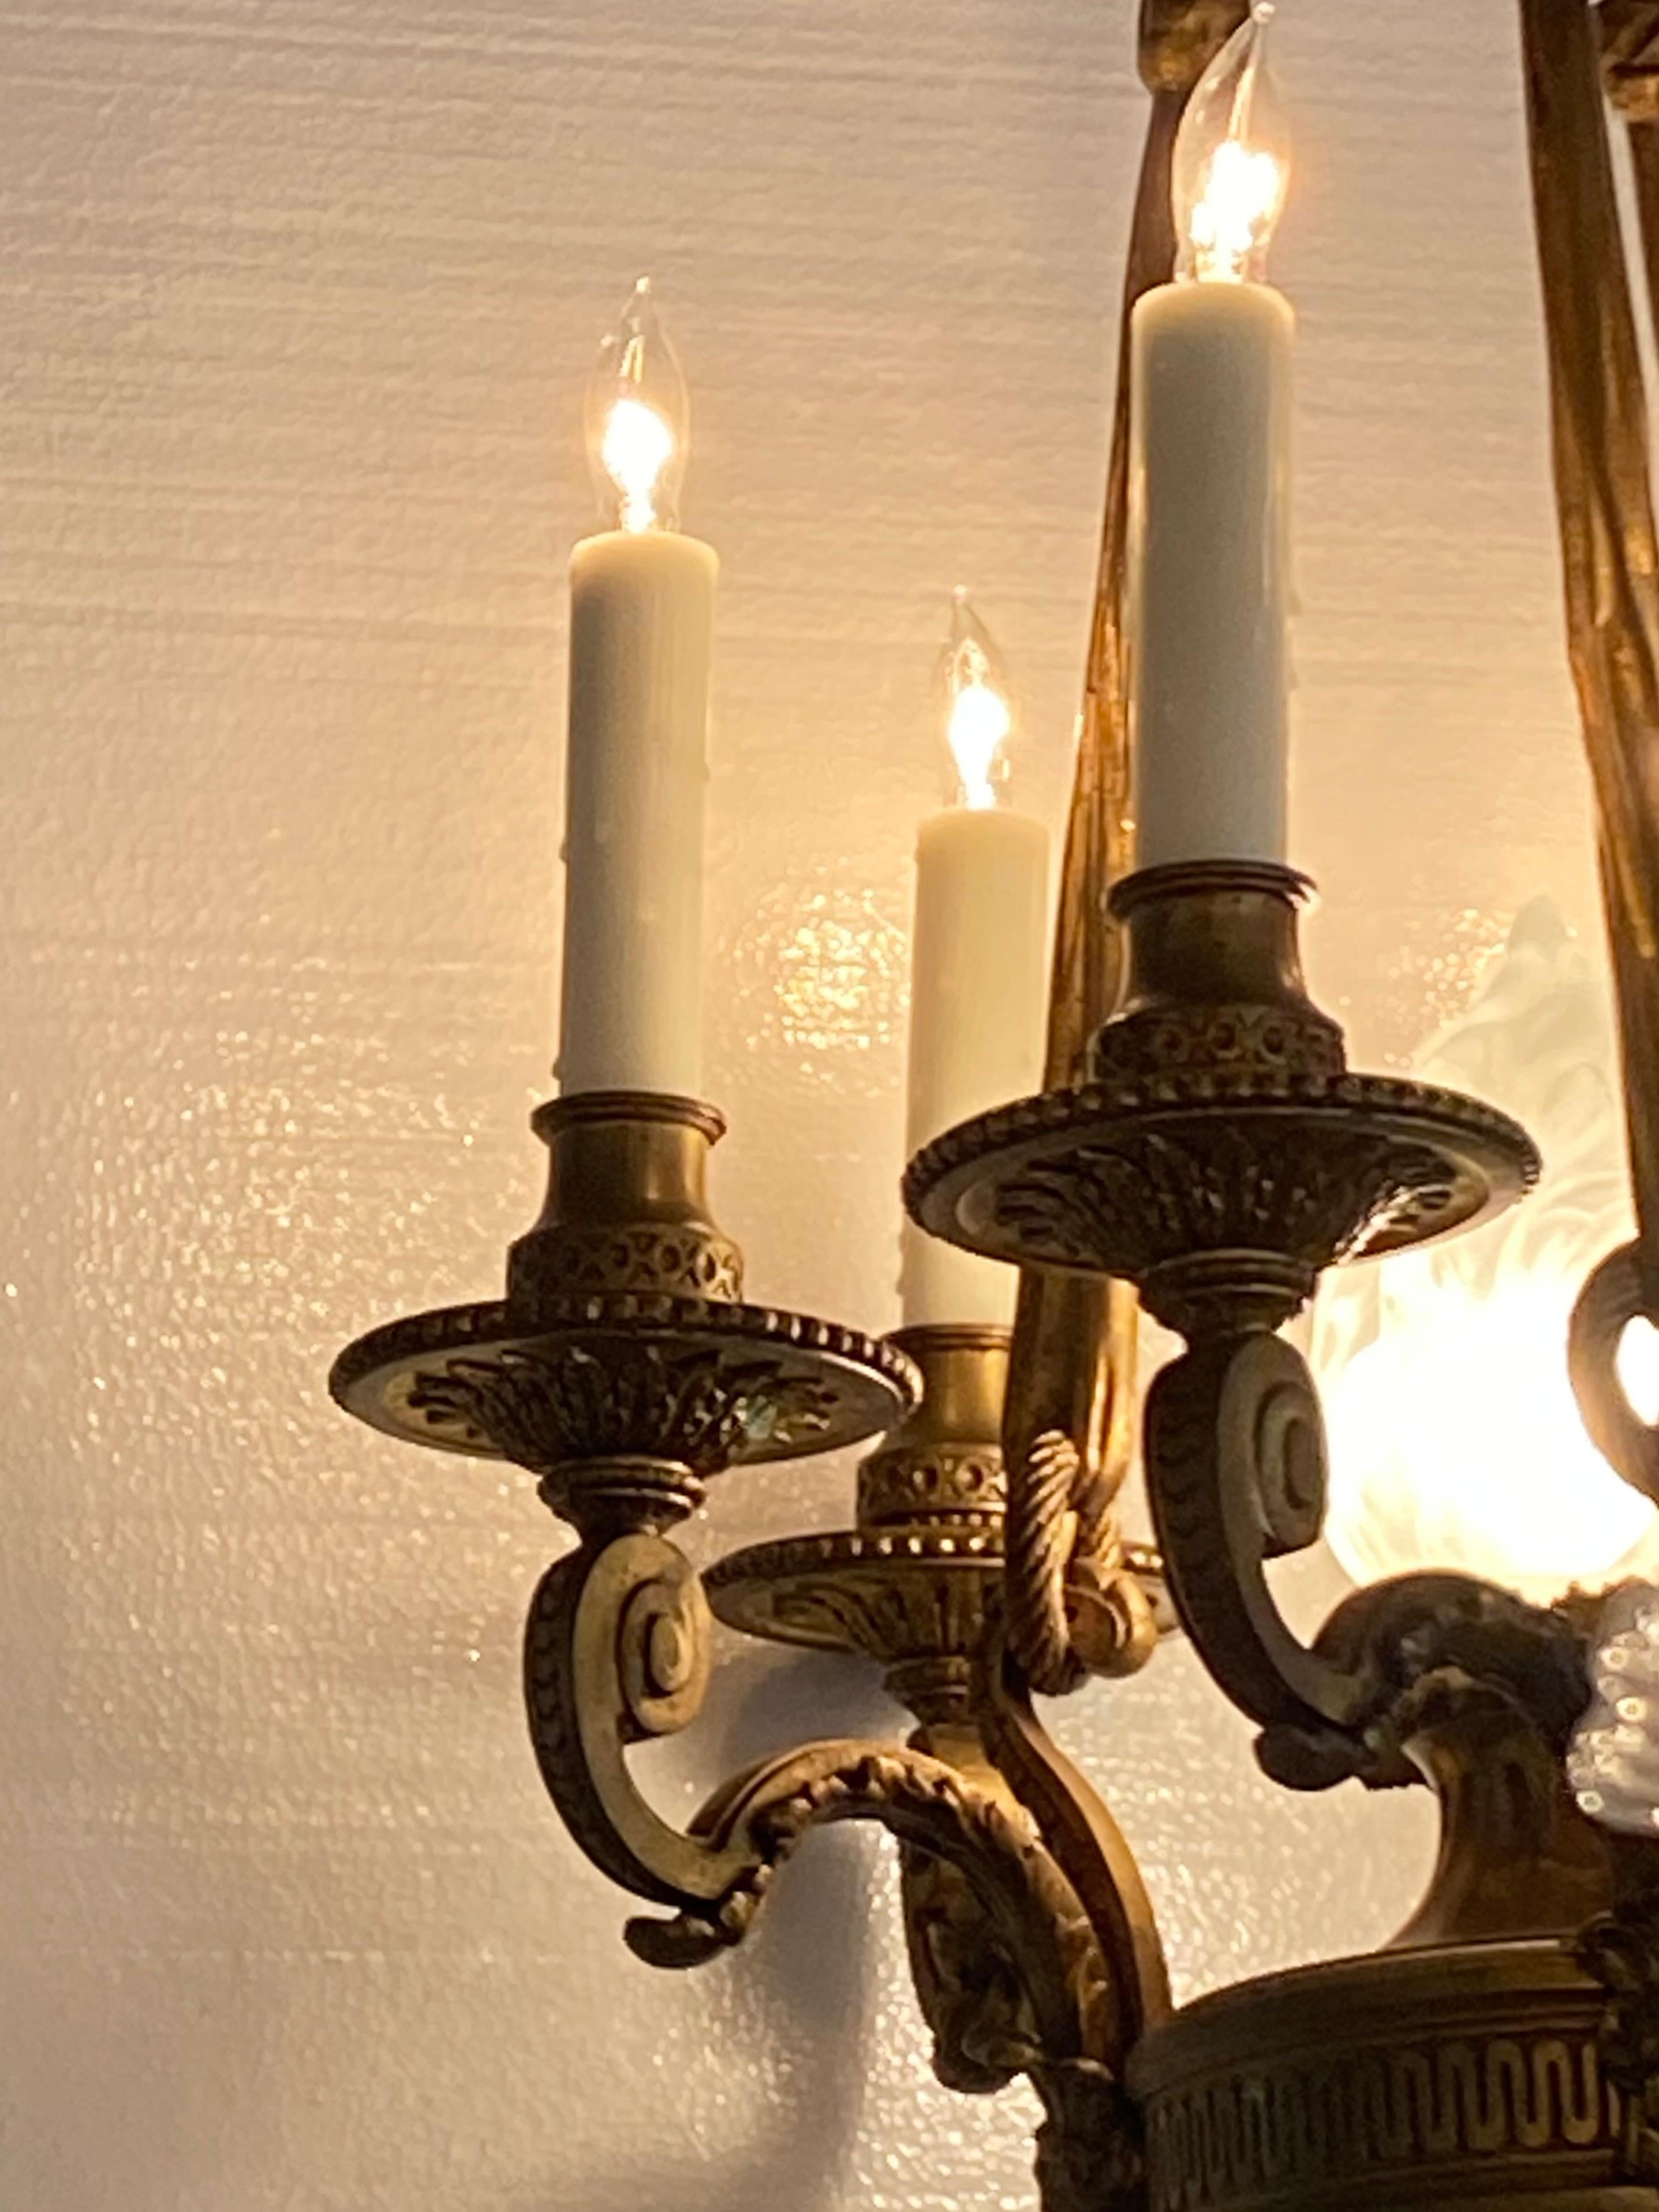 Small seven-light chandelier, one of the lights is in the center it's a decorative light, 5 - 4